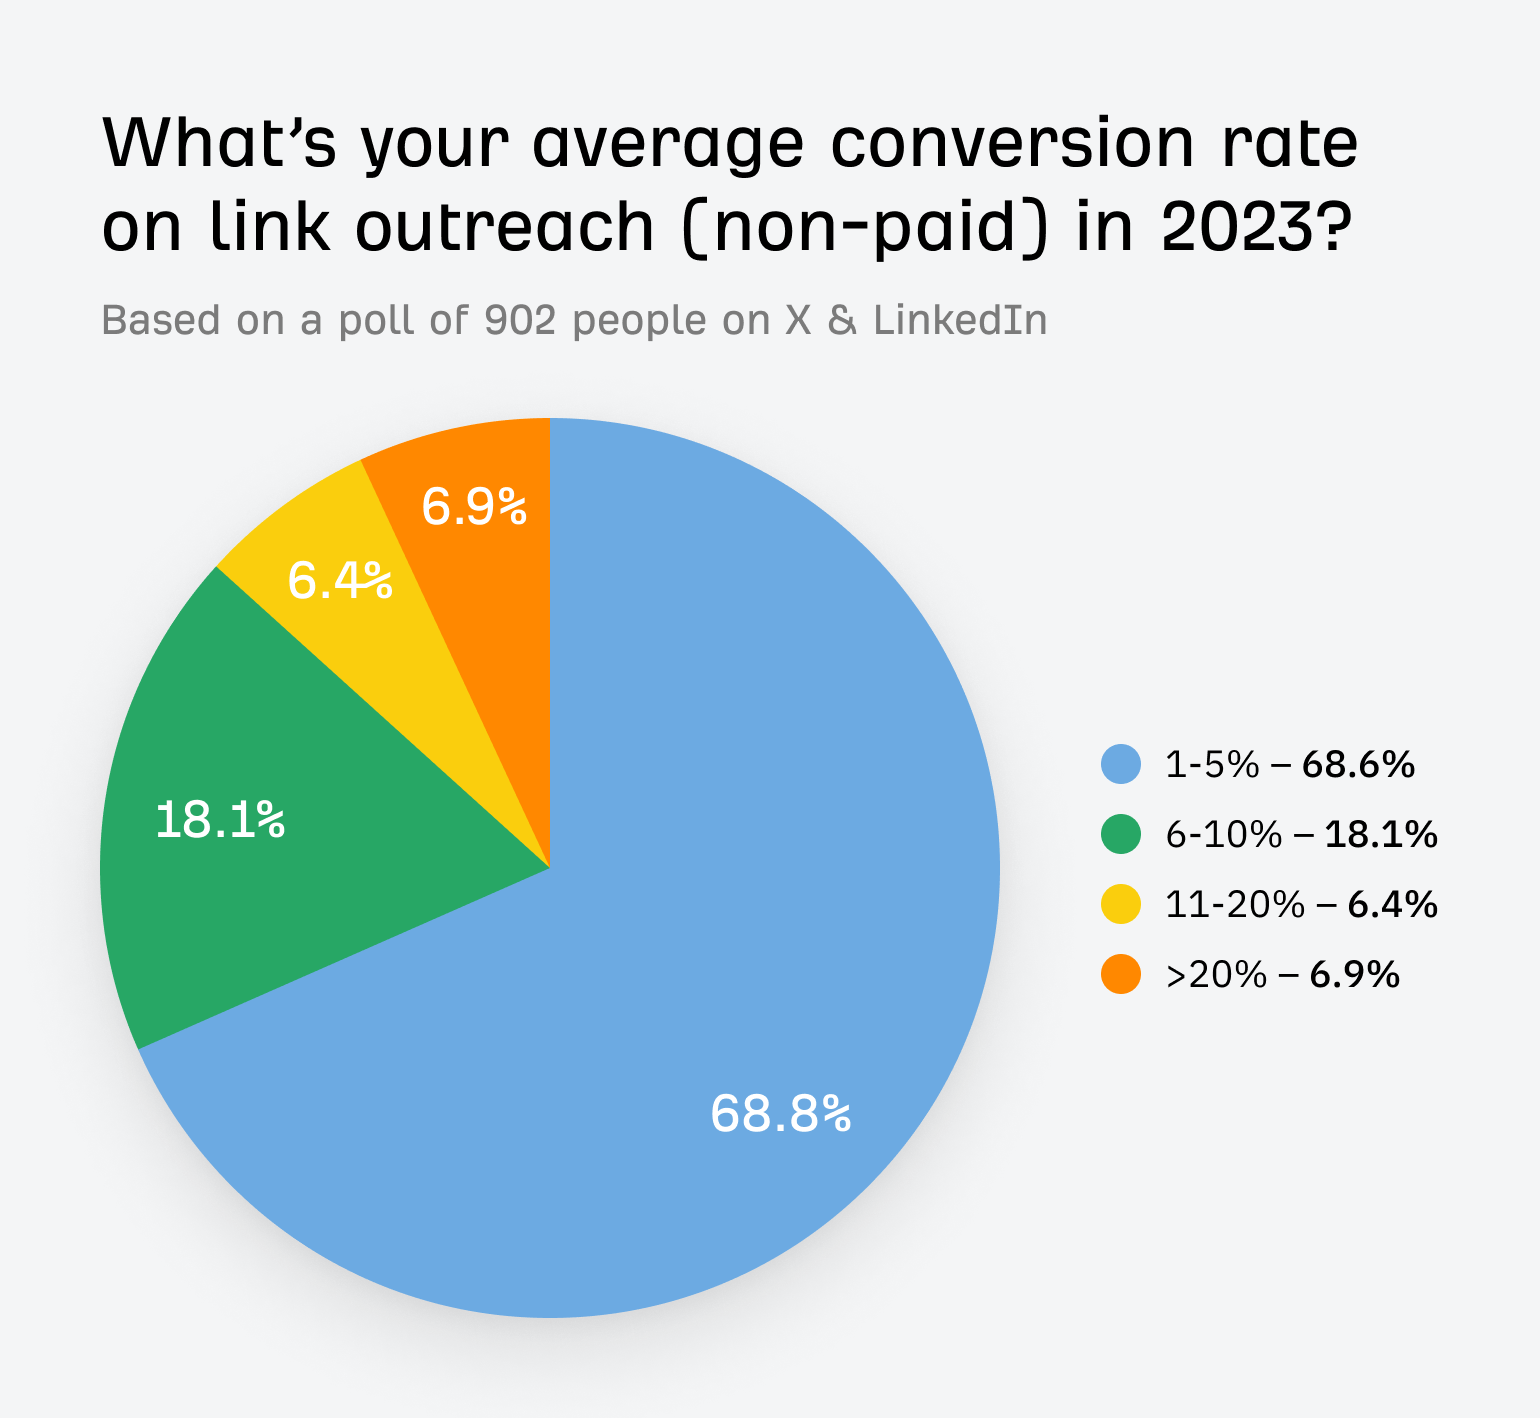 Link outreach conversion rates in 2023